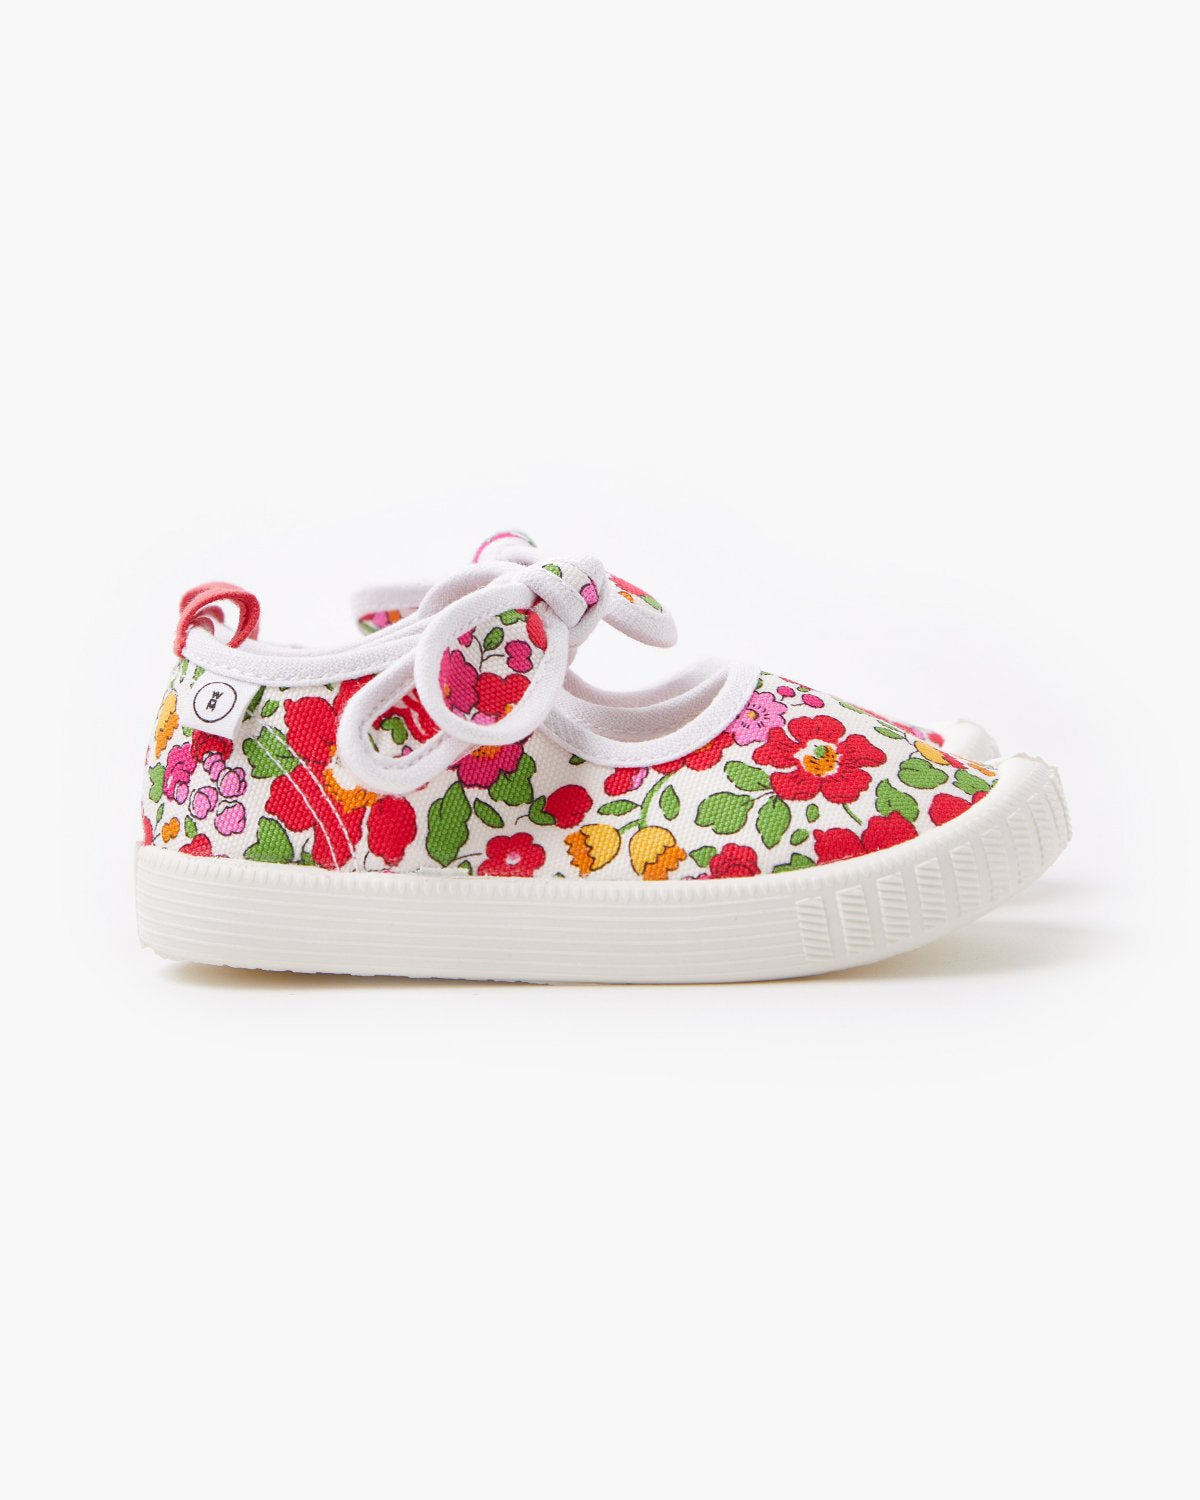 LIBERTY MILLIE CANVAS BETSY RED - WALNUT MELBOURNE - kids, kids footwear, kids shoes, Kids Shoes & Accessories - Stomp Shoes Darwin